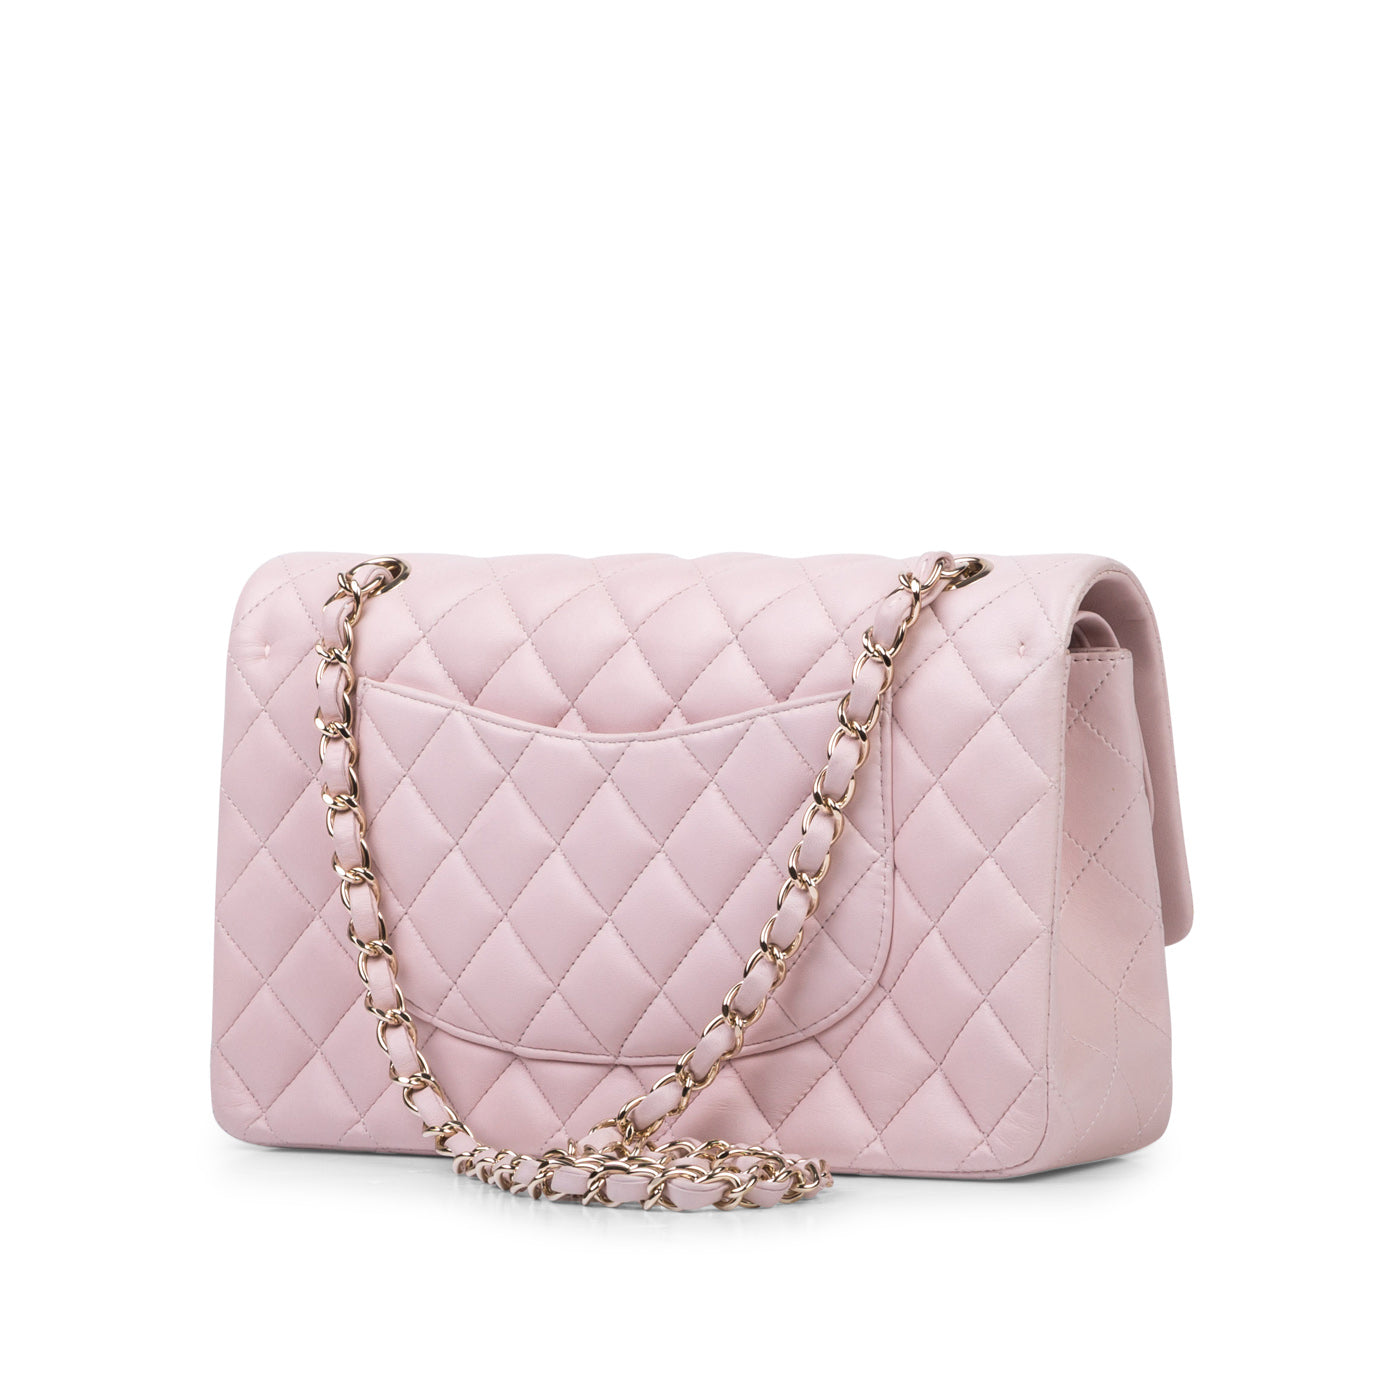 Chanel Light Pink Quilted Lambskin Leather Classic Jumbo Double